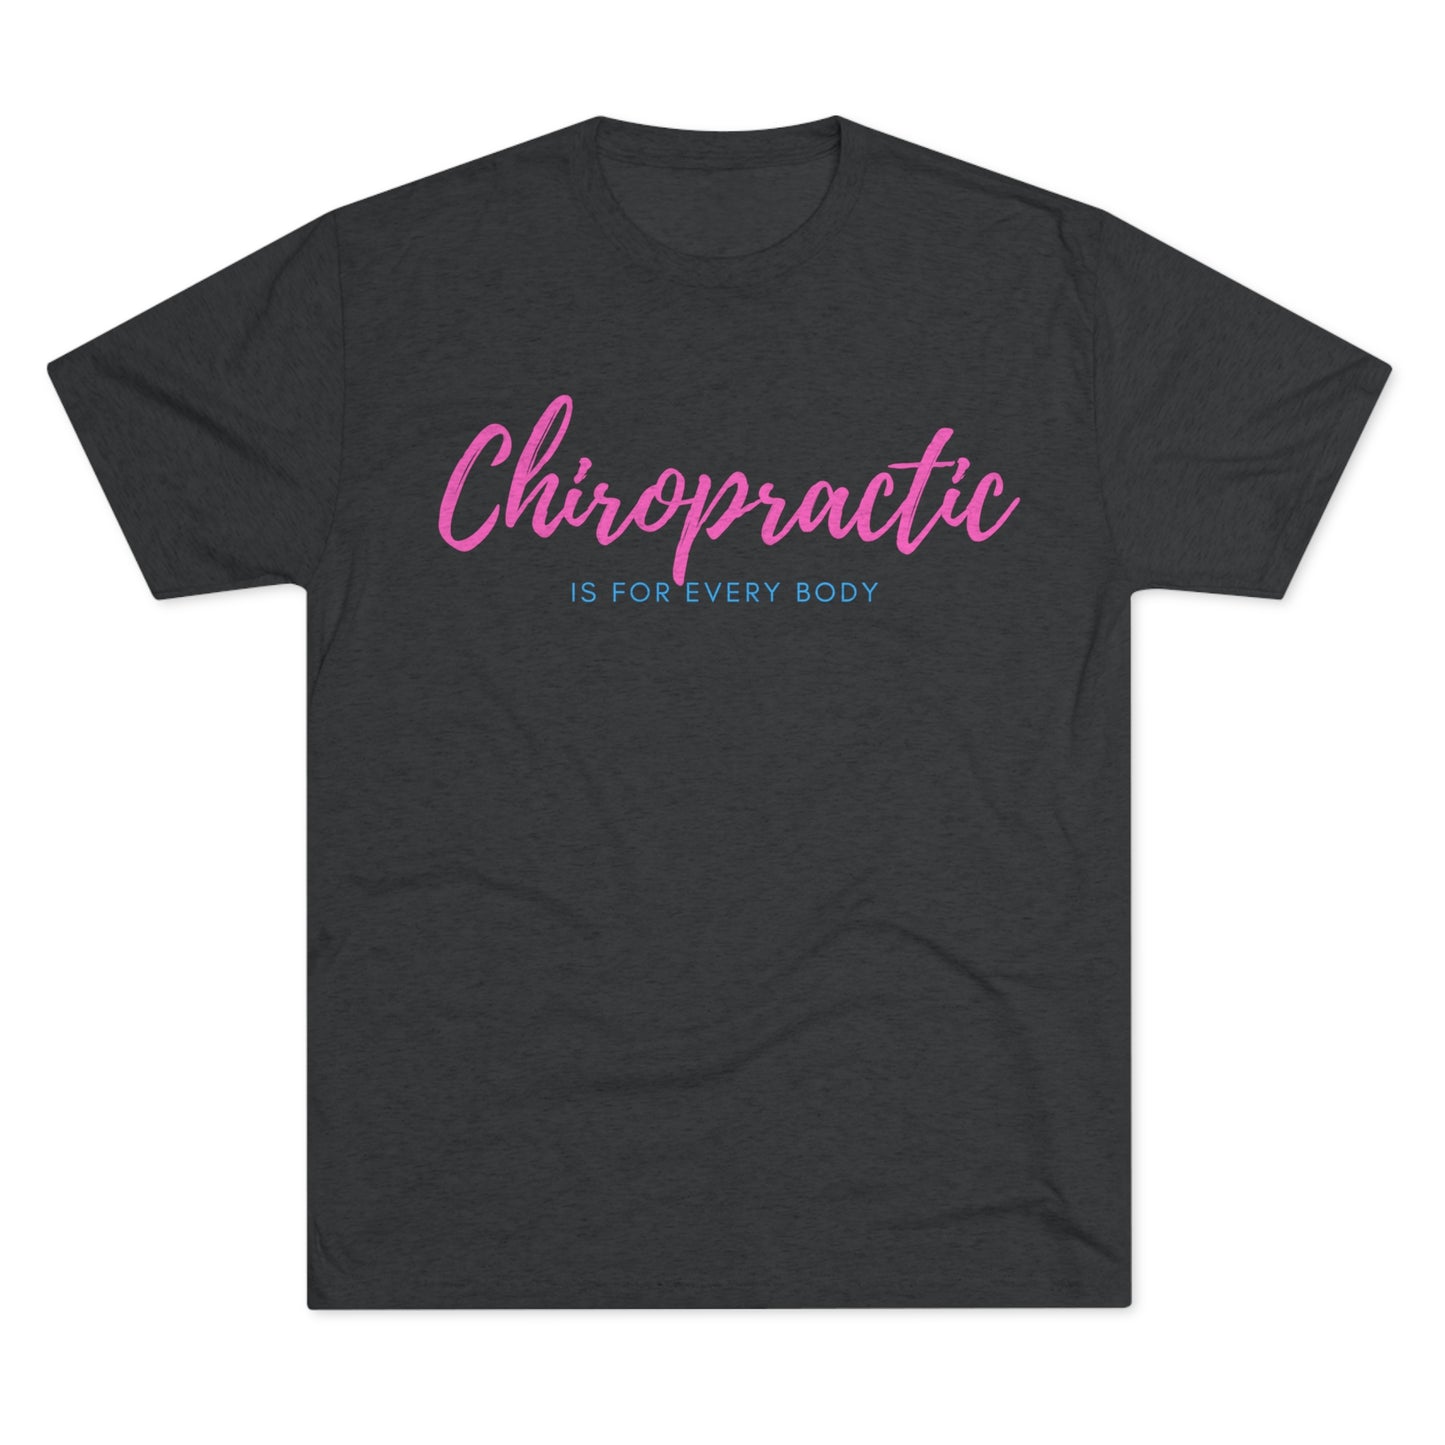 Chiropractic Is For Every Body v2 - Next Level Men's Tri-Blend Crew Tee